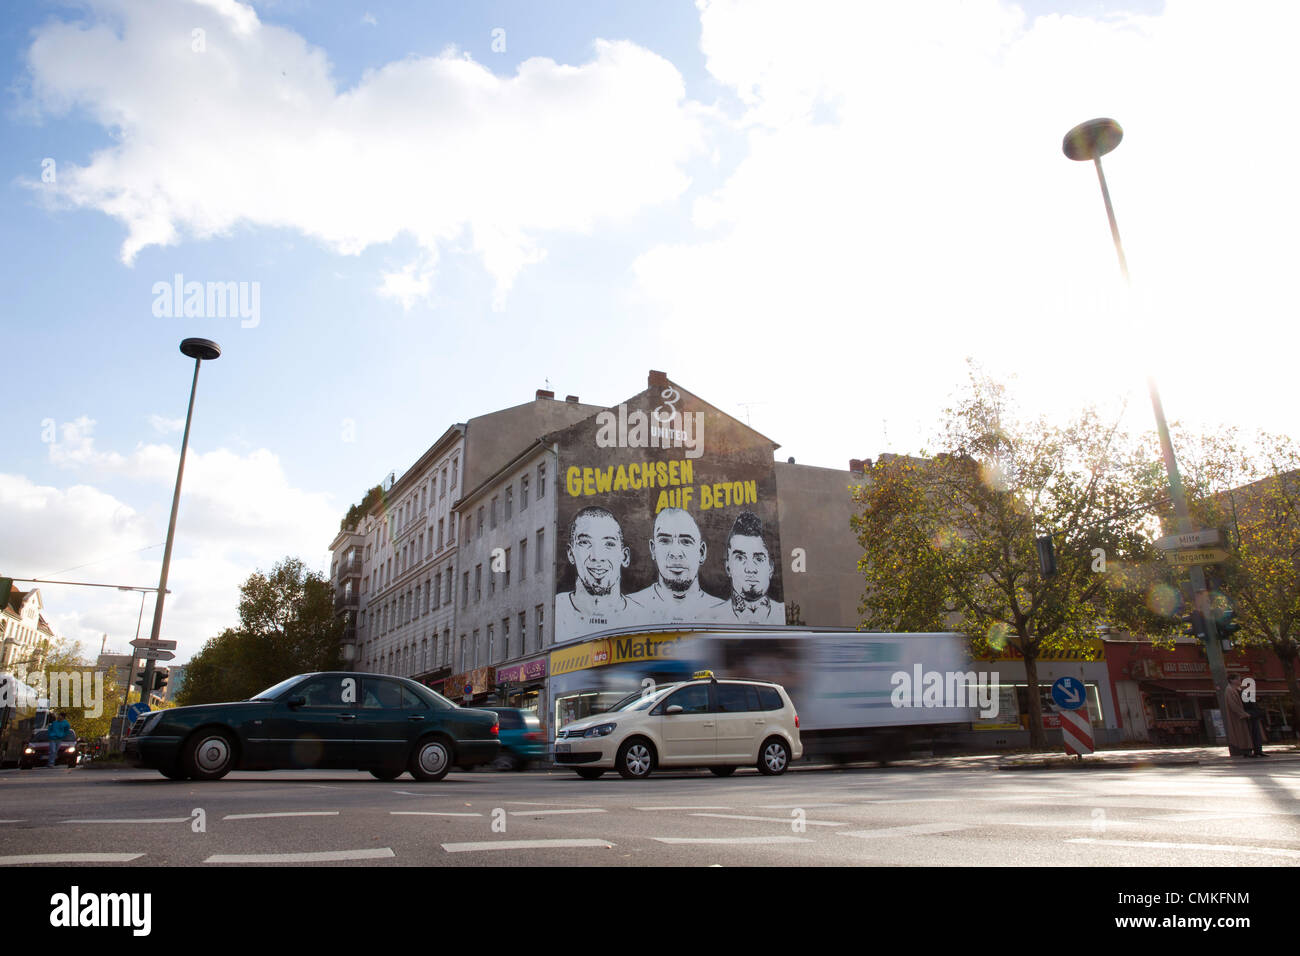 Berlin-Wedding, Germany. 30th Oct, 2013. A sporting good manufacturer advertises with the faces of the brothers Jerome (L-R), George and Kevin-Prince Boateng on the wall of a building in Berlin-Wedding, Germany, 30 October 2013. Schalke's pro soccer player Kevin-Prince Boateng supposedly learned how to play soccer in this cage. Photo: Joerg Carstensen/dpa/Alamy Live News Stock Photo